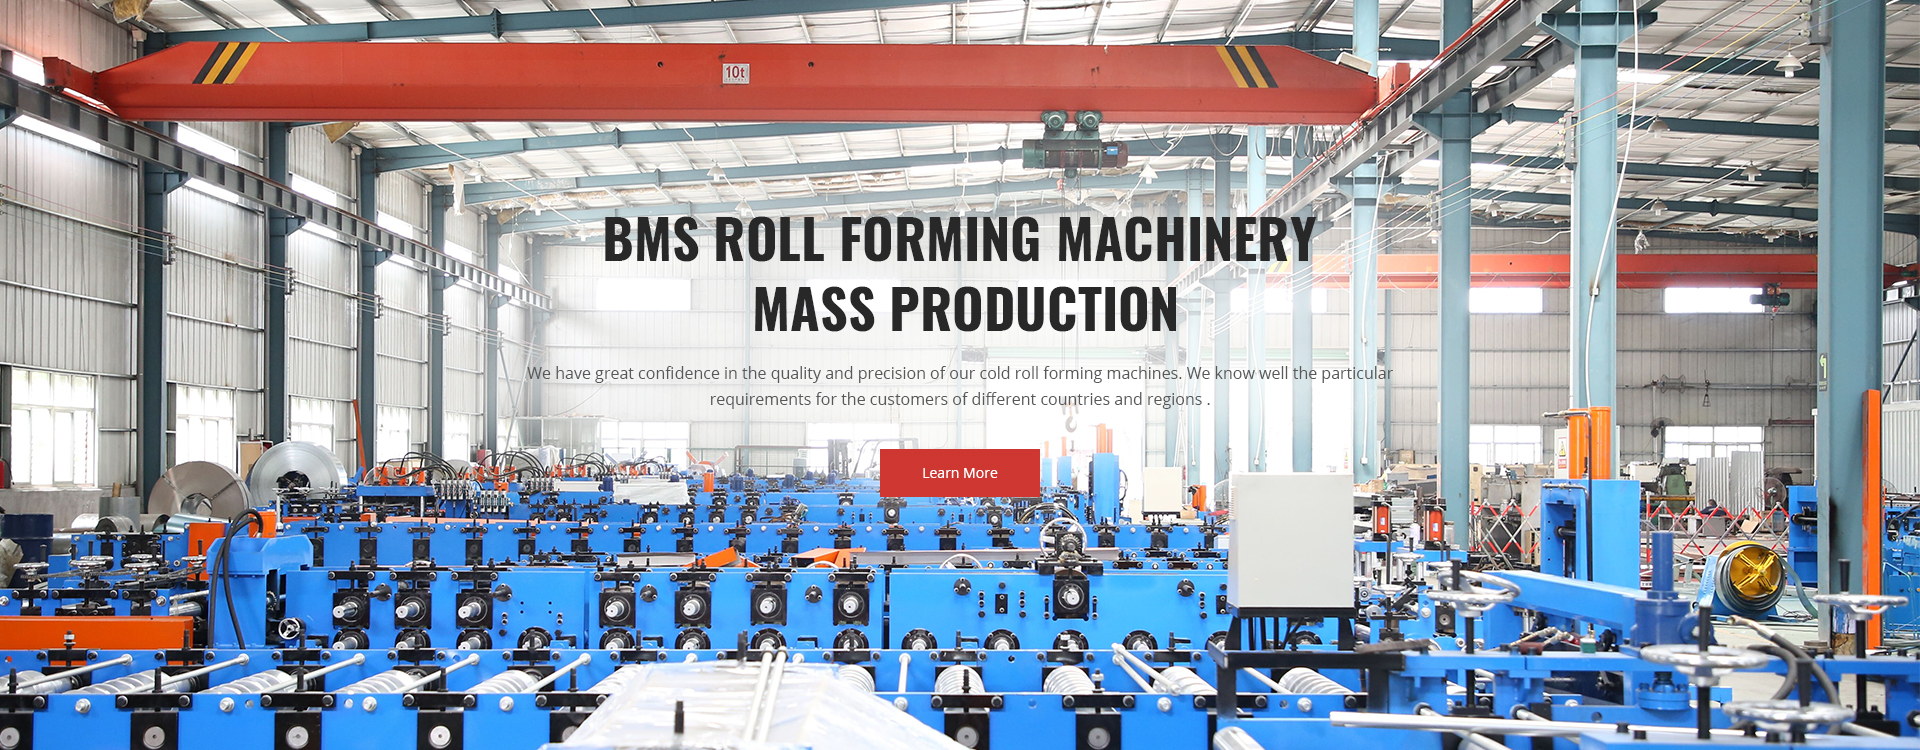 Roll forming machinery mass production